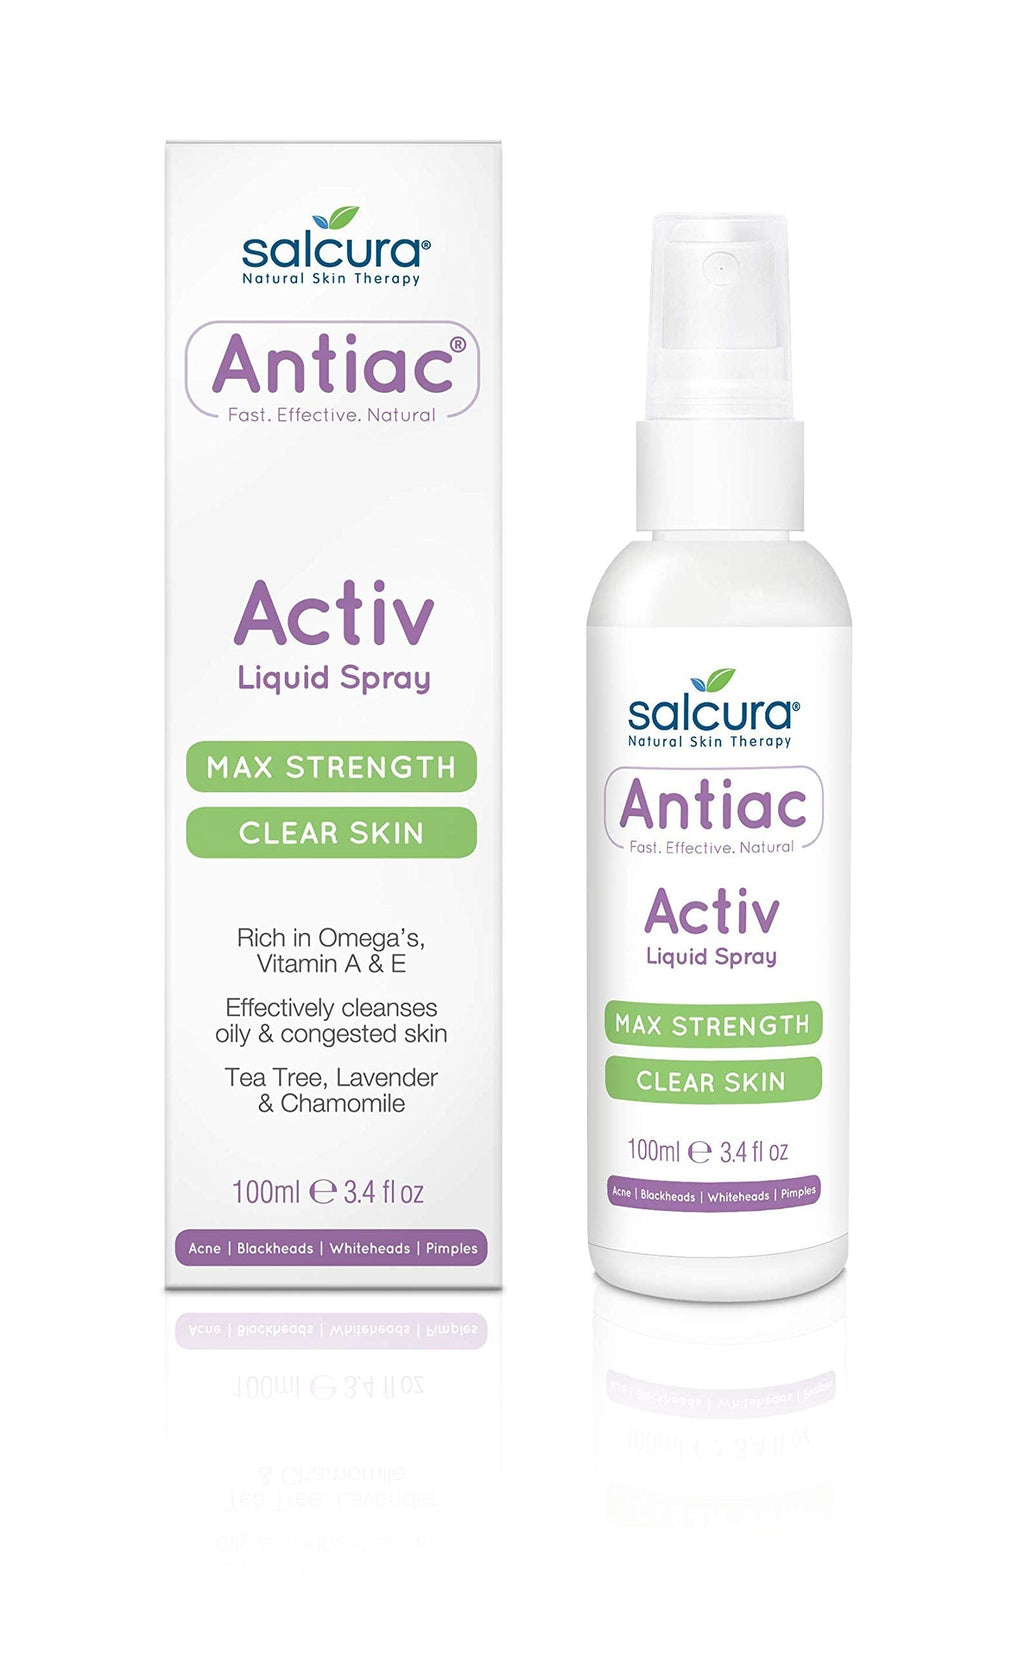 [Australia] - Salcura Natural Skin Therapy, Antiac Activ Liquid Spray, Suitable For Anyone Prone To Suffering From Oily, Congested & Acne-Prone Skin, Refresh, Cleanse & Nourish The Skin 100ml 